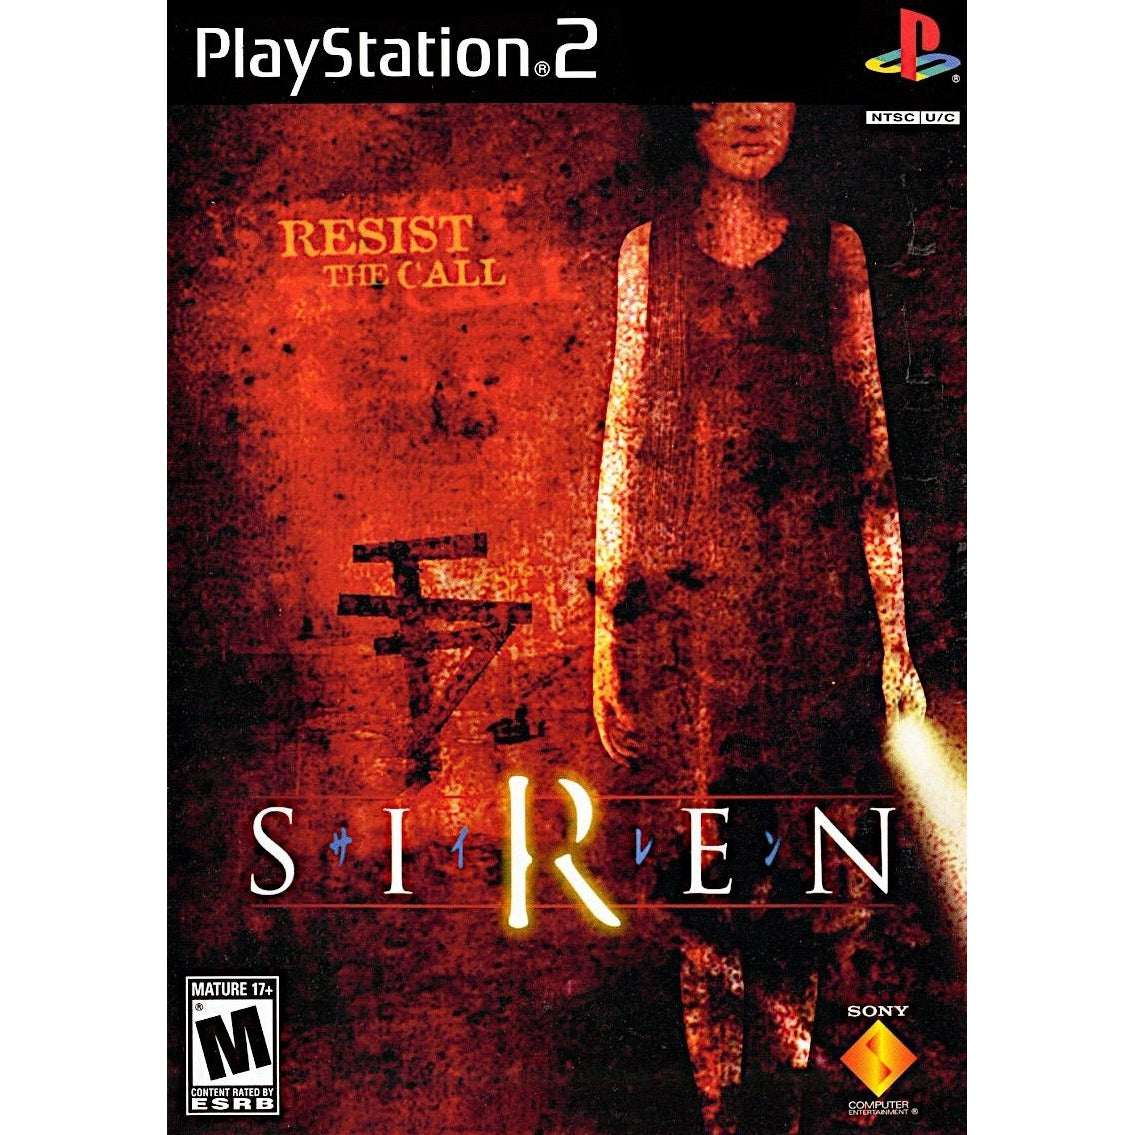 Siren - PlayStation 2 (PS2) Game Complete - YourGamingShop.com - Buy, Sell, Trade Video Games Online. 120 Day Warranty. Satisfaction Guaranteed.